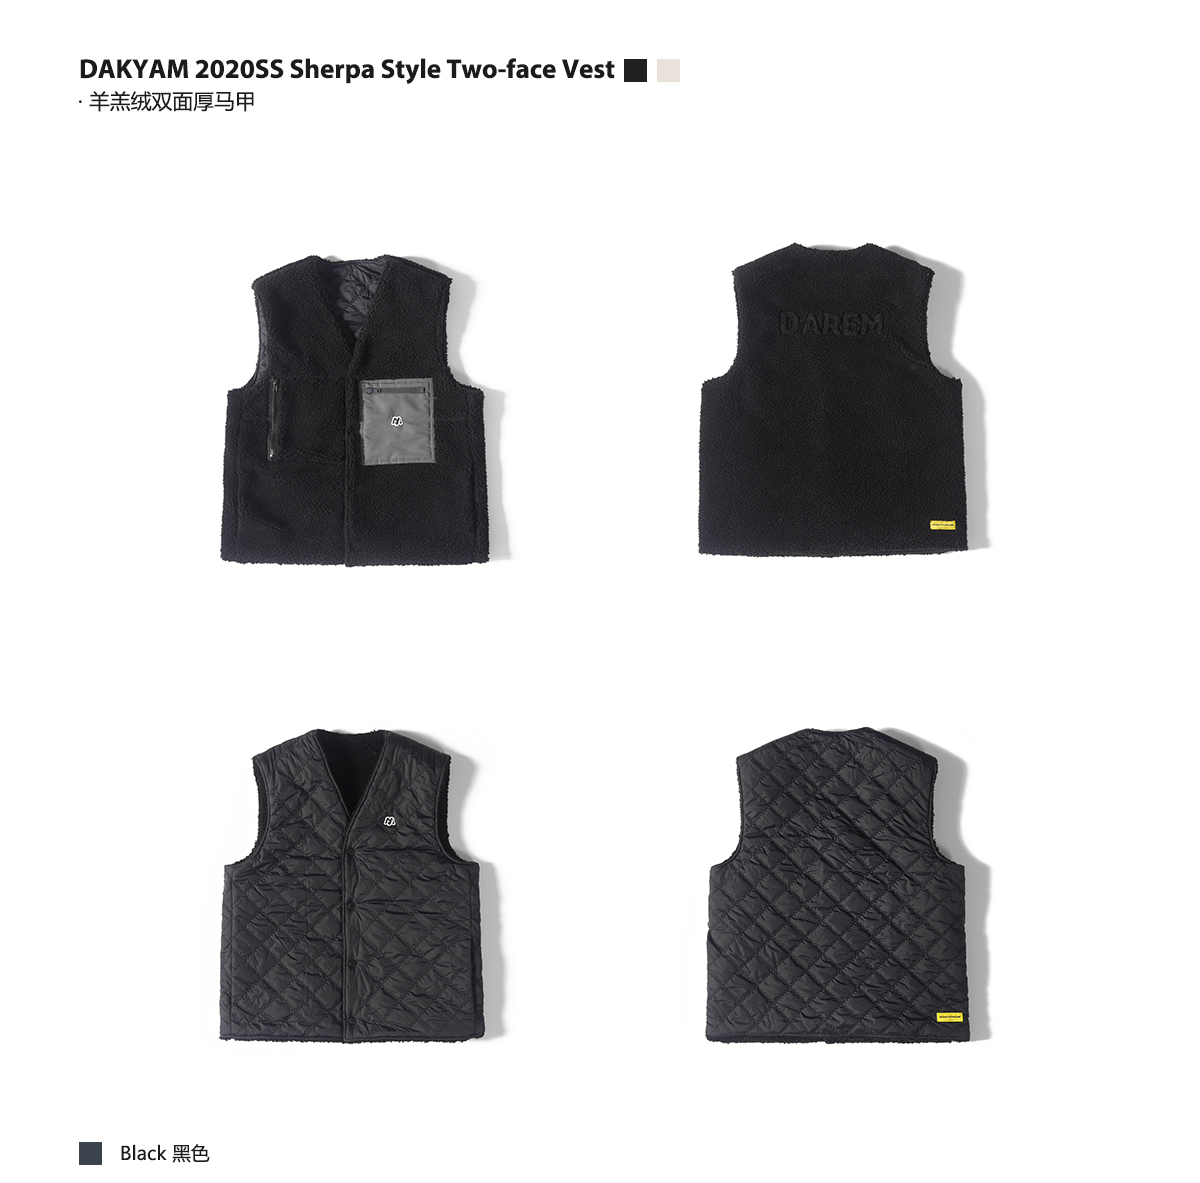 SHERPA STYLE TWO-FACE VEST